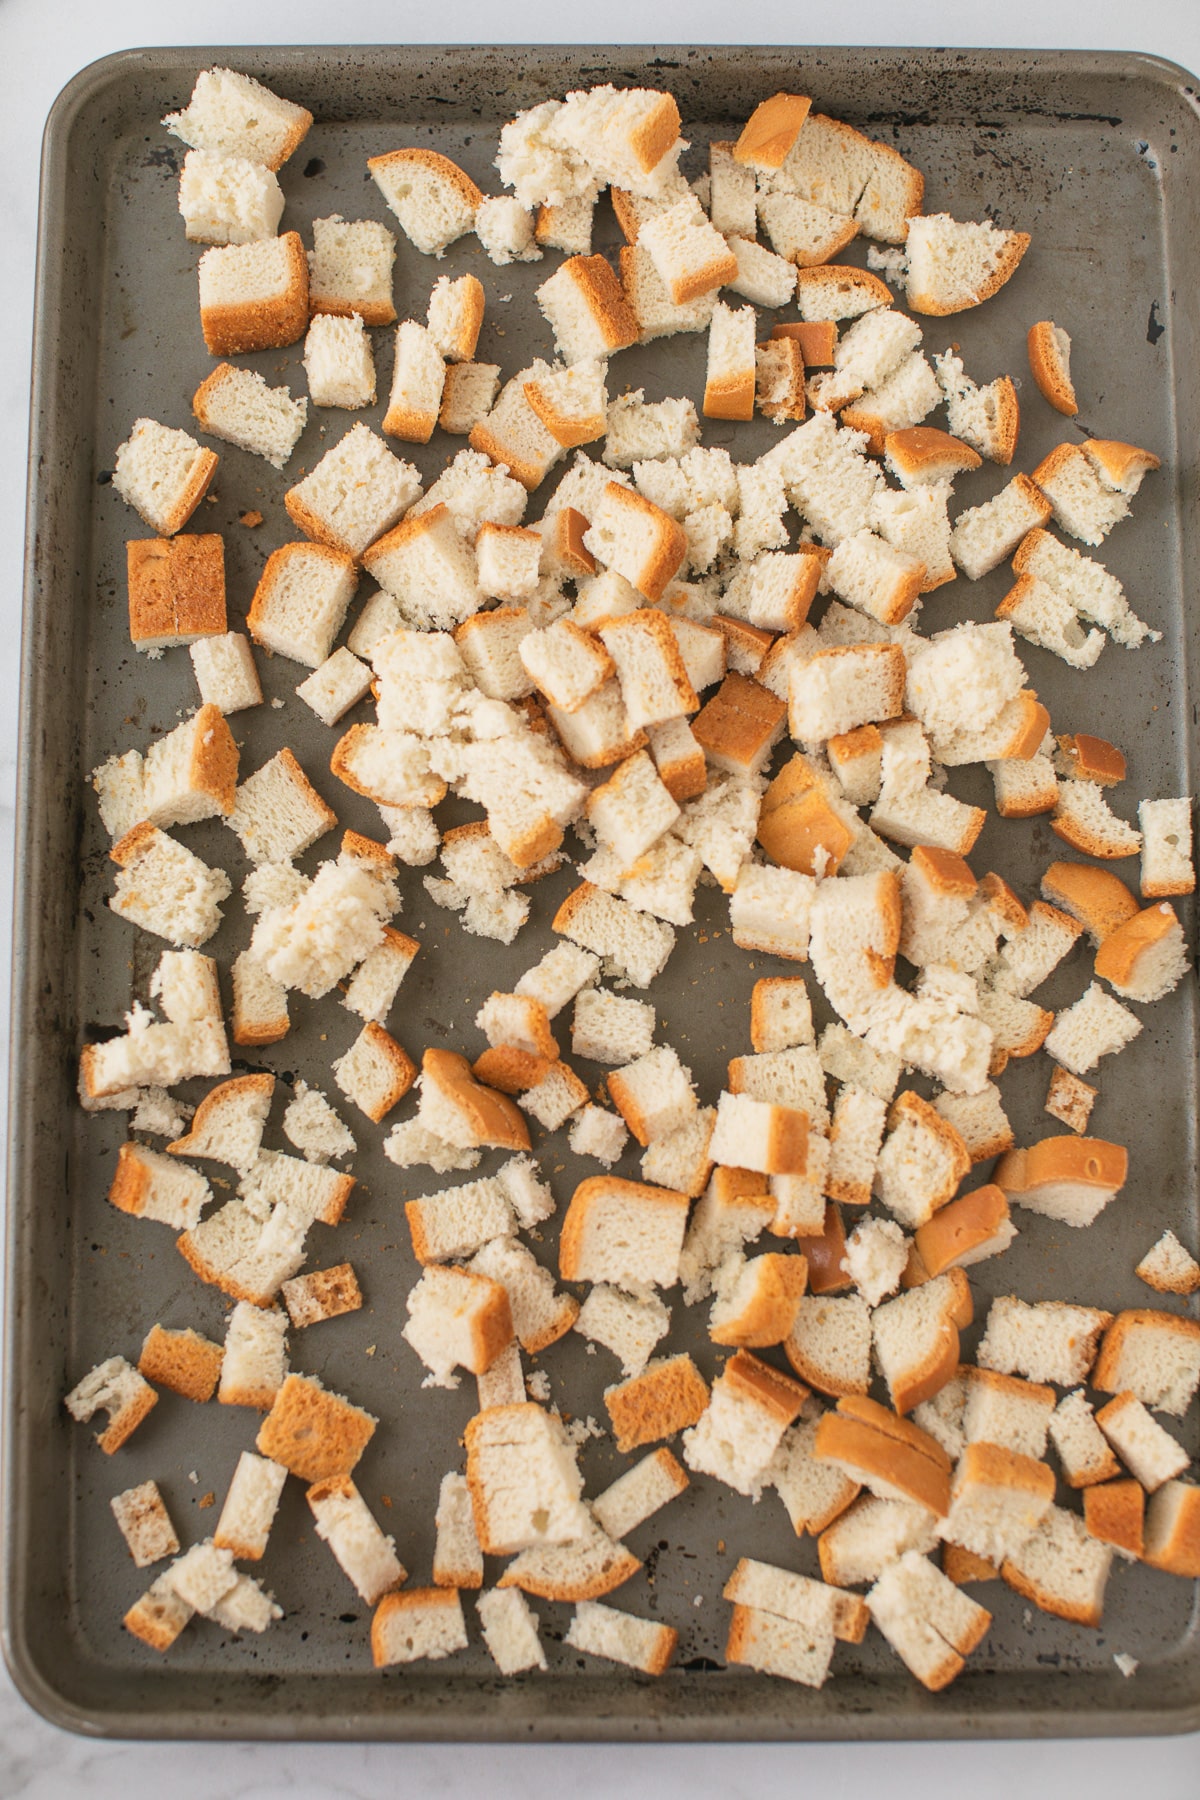 bread cubes on a baking sheet ready to be baked